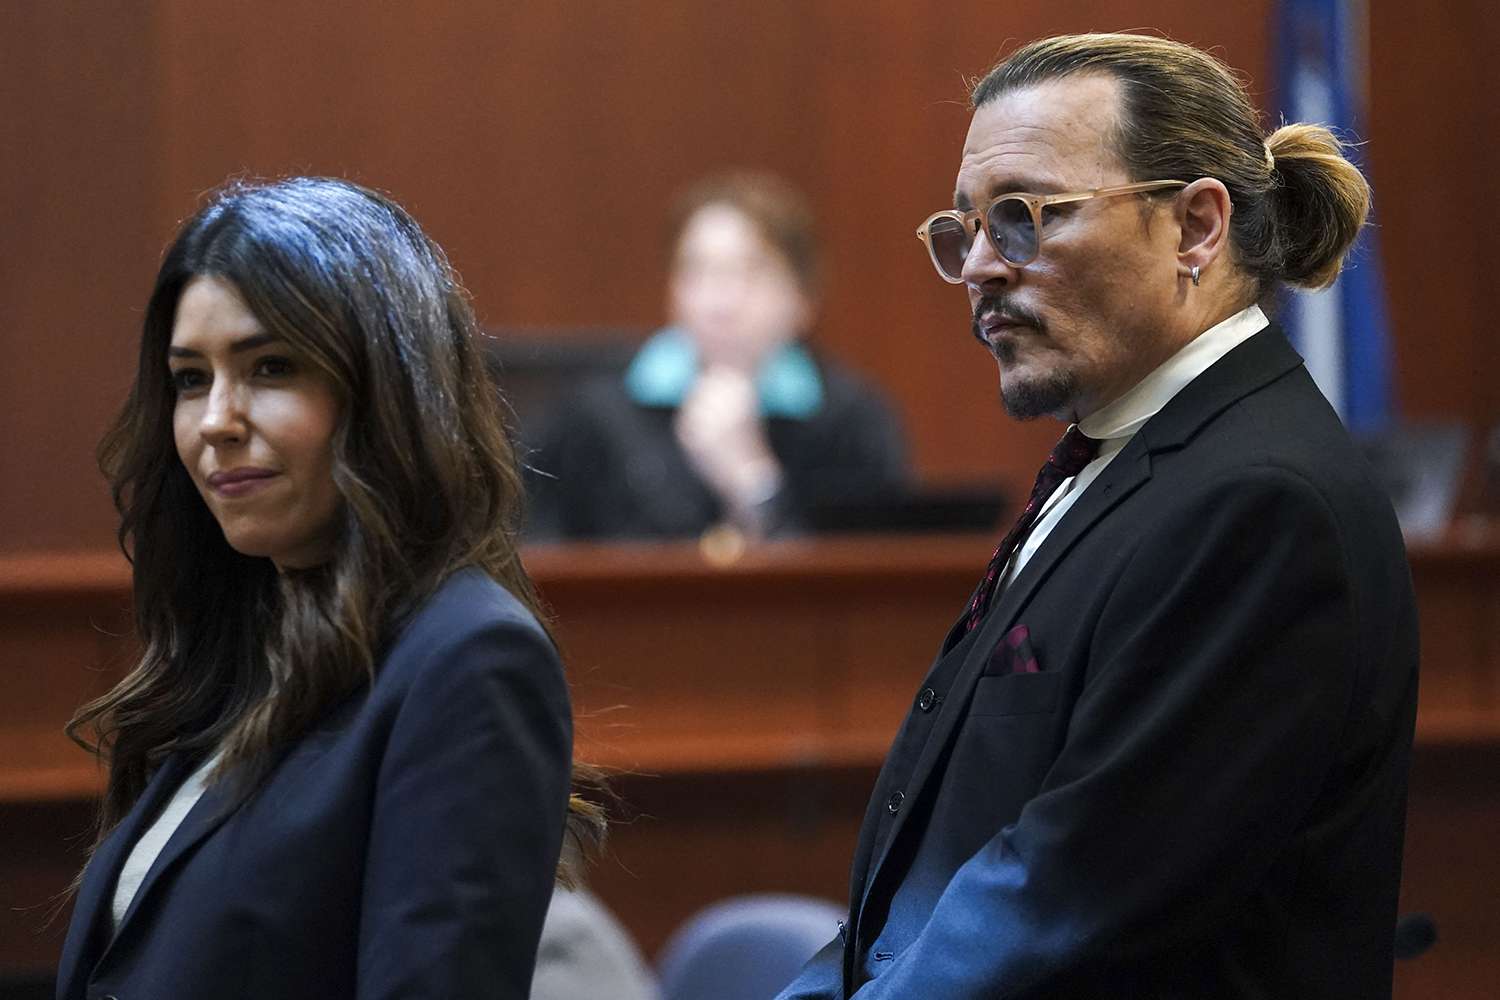 US actor Johnny Depp stands next to his lawyer Camille Vasquez after a break in the defamation trial against ex-wife Amber Heard at the Fairfax County Circuit Courthouse